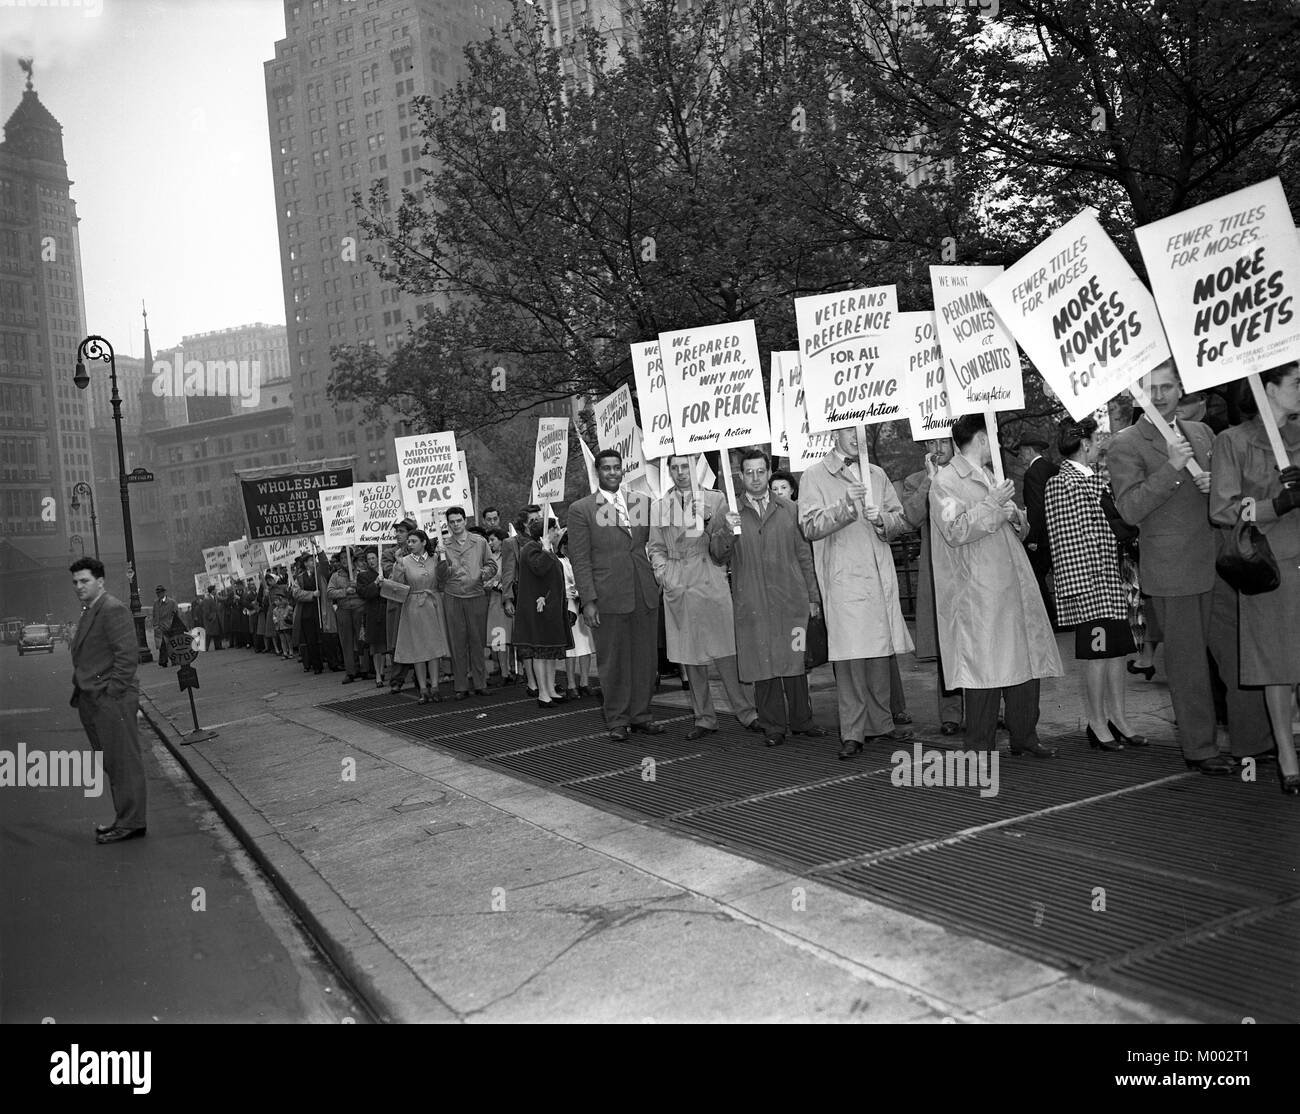 American second world war veterans 'Housing Protest' against the shortage of housing ouside City Hall, New York, USA 1946 Stock Photo